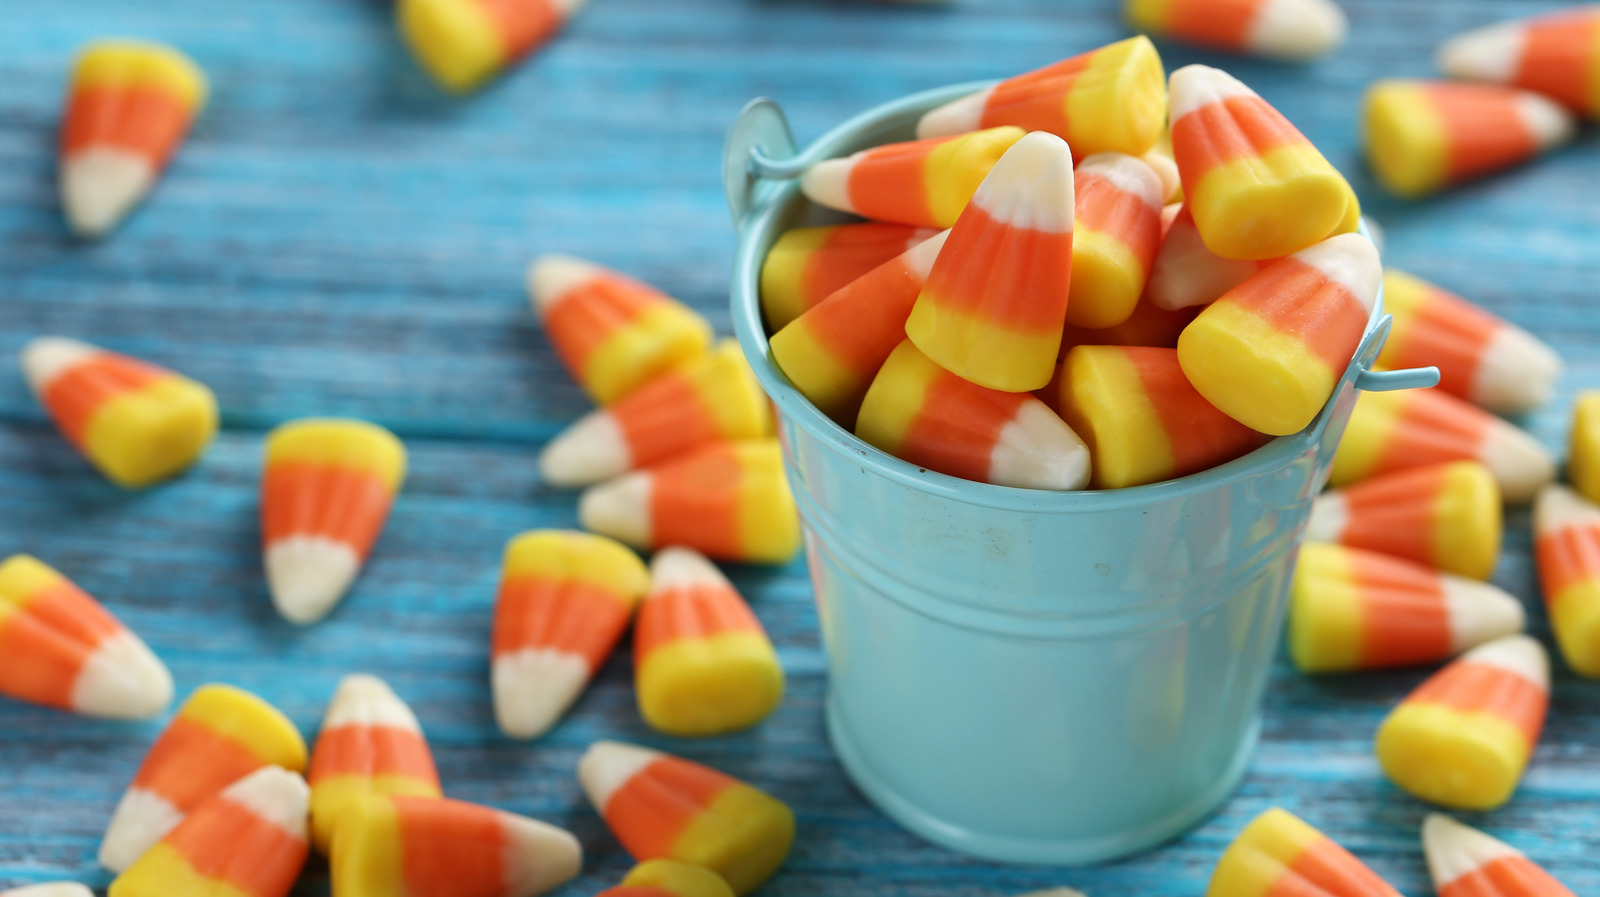 Brach's Releases 'Tailgate' Candy Corn Mix